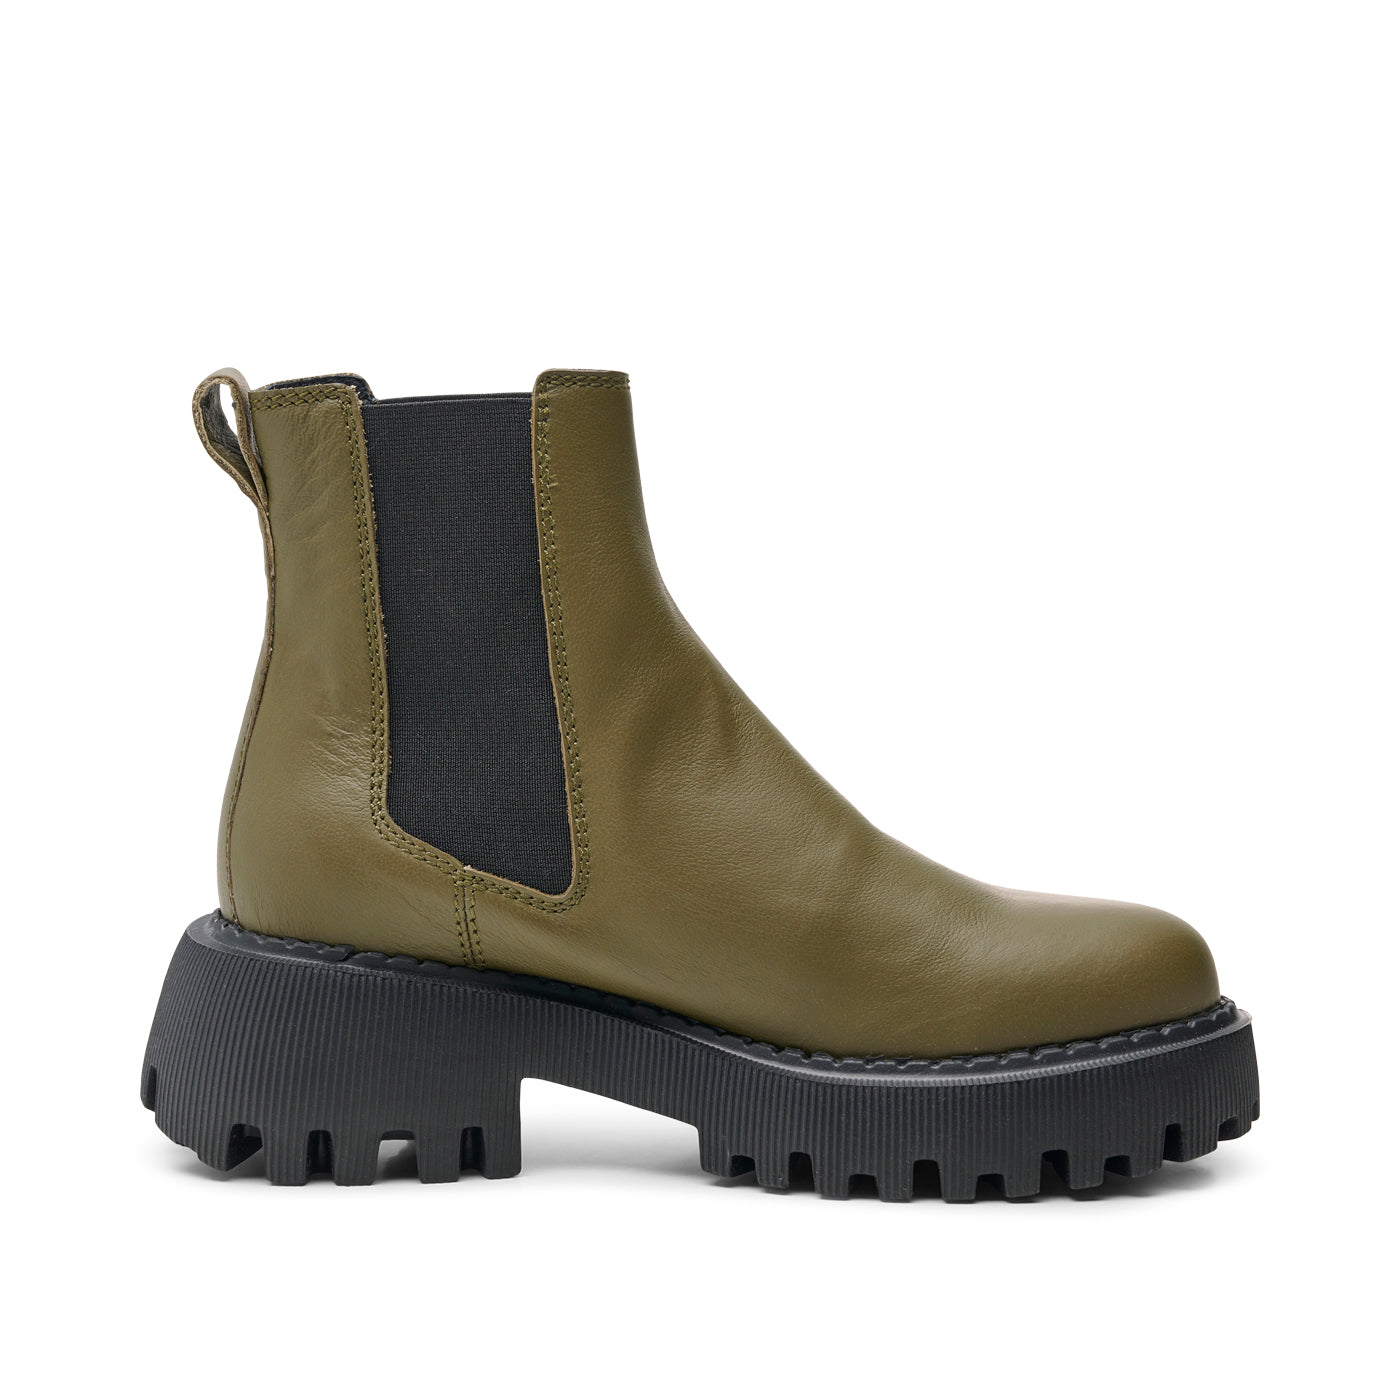 SHOE THE BEAR WOMENS Posey chelsea boot leather Boots 916 ALGAE